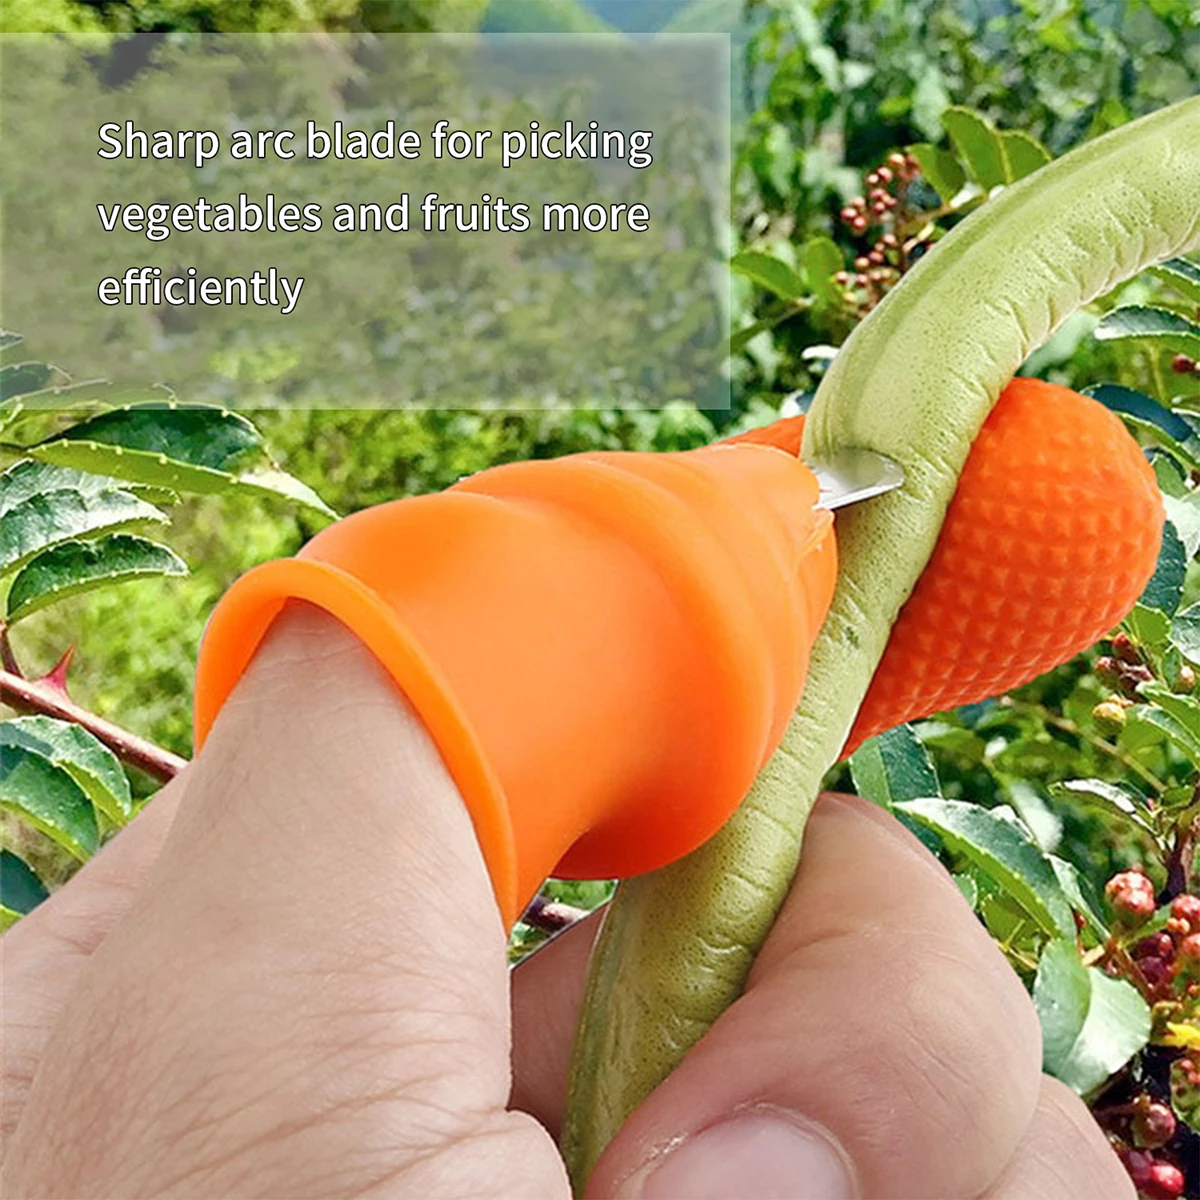 

Silicone Thumb Knife Garden Herbs Tools Gardening Plant Pruning Fruit Picker Vegetable Trimming with Cut-Resistant Finger Guards